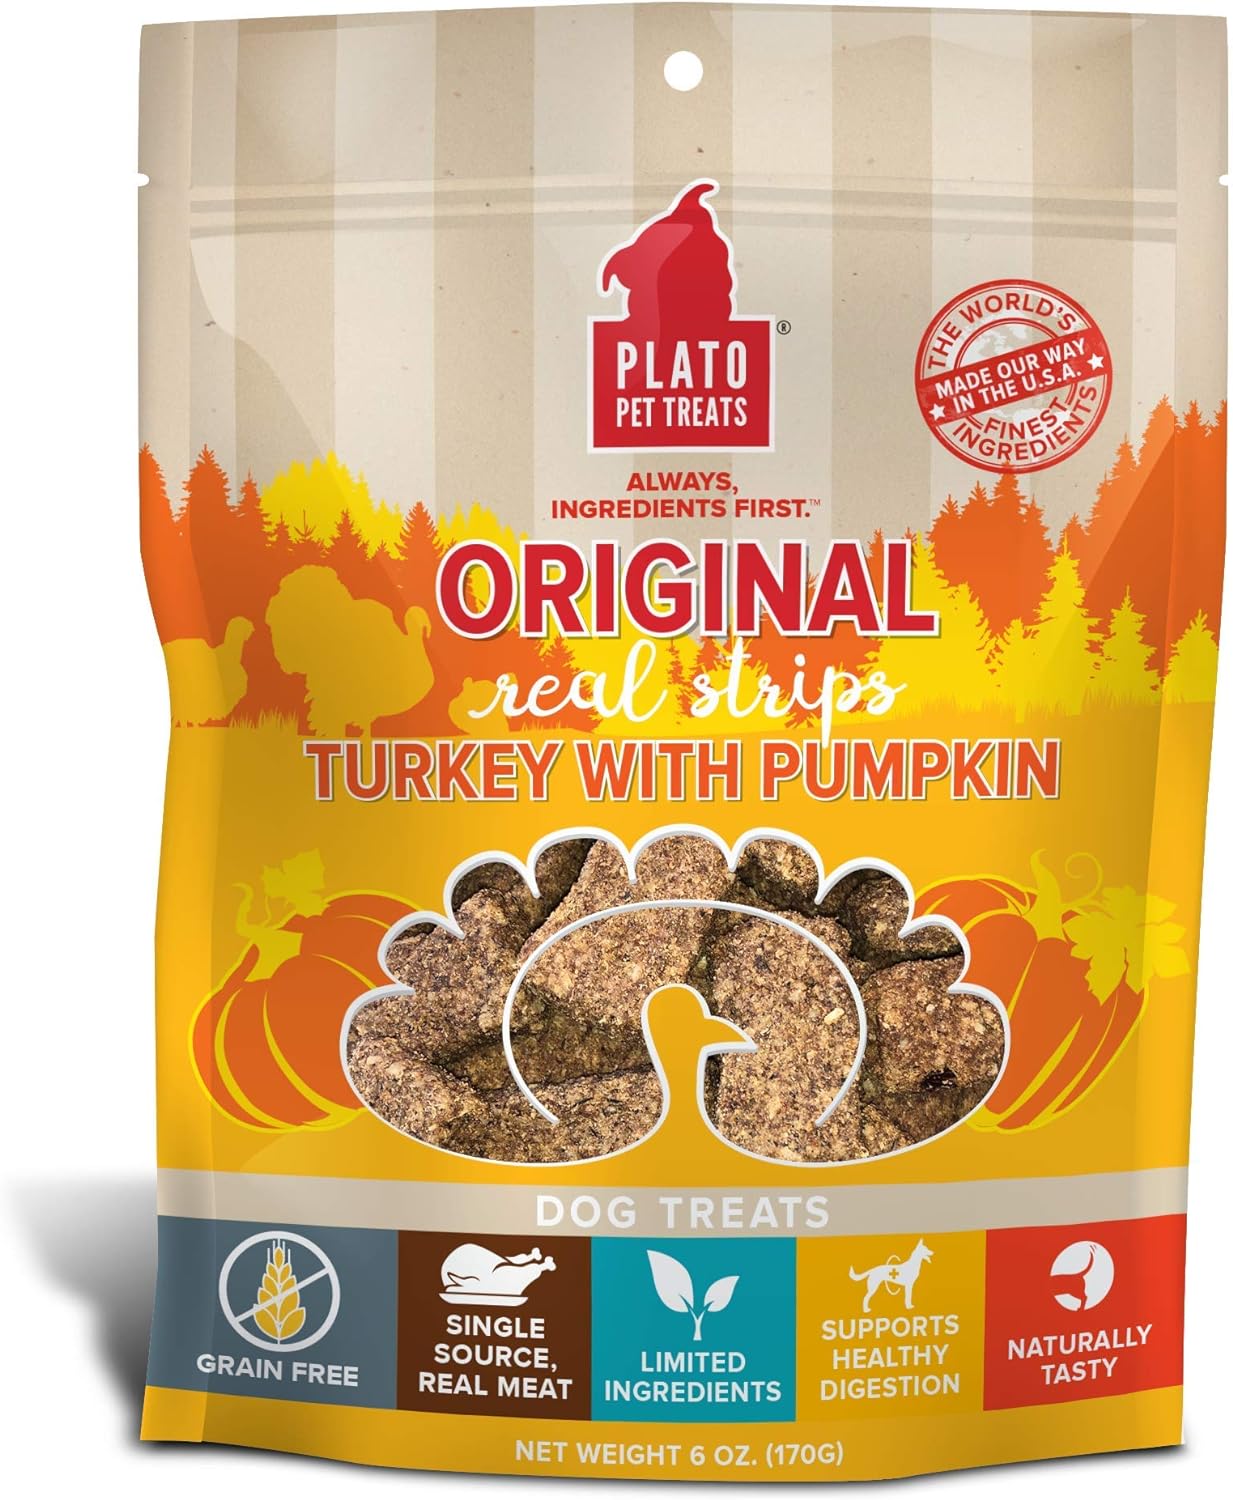 PLATO Turkey Real Strips Natural Dog Treats - Real Meat - Air Dried - Made in the USA - Turkey & Pumpkin, 6 ounces